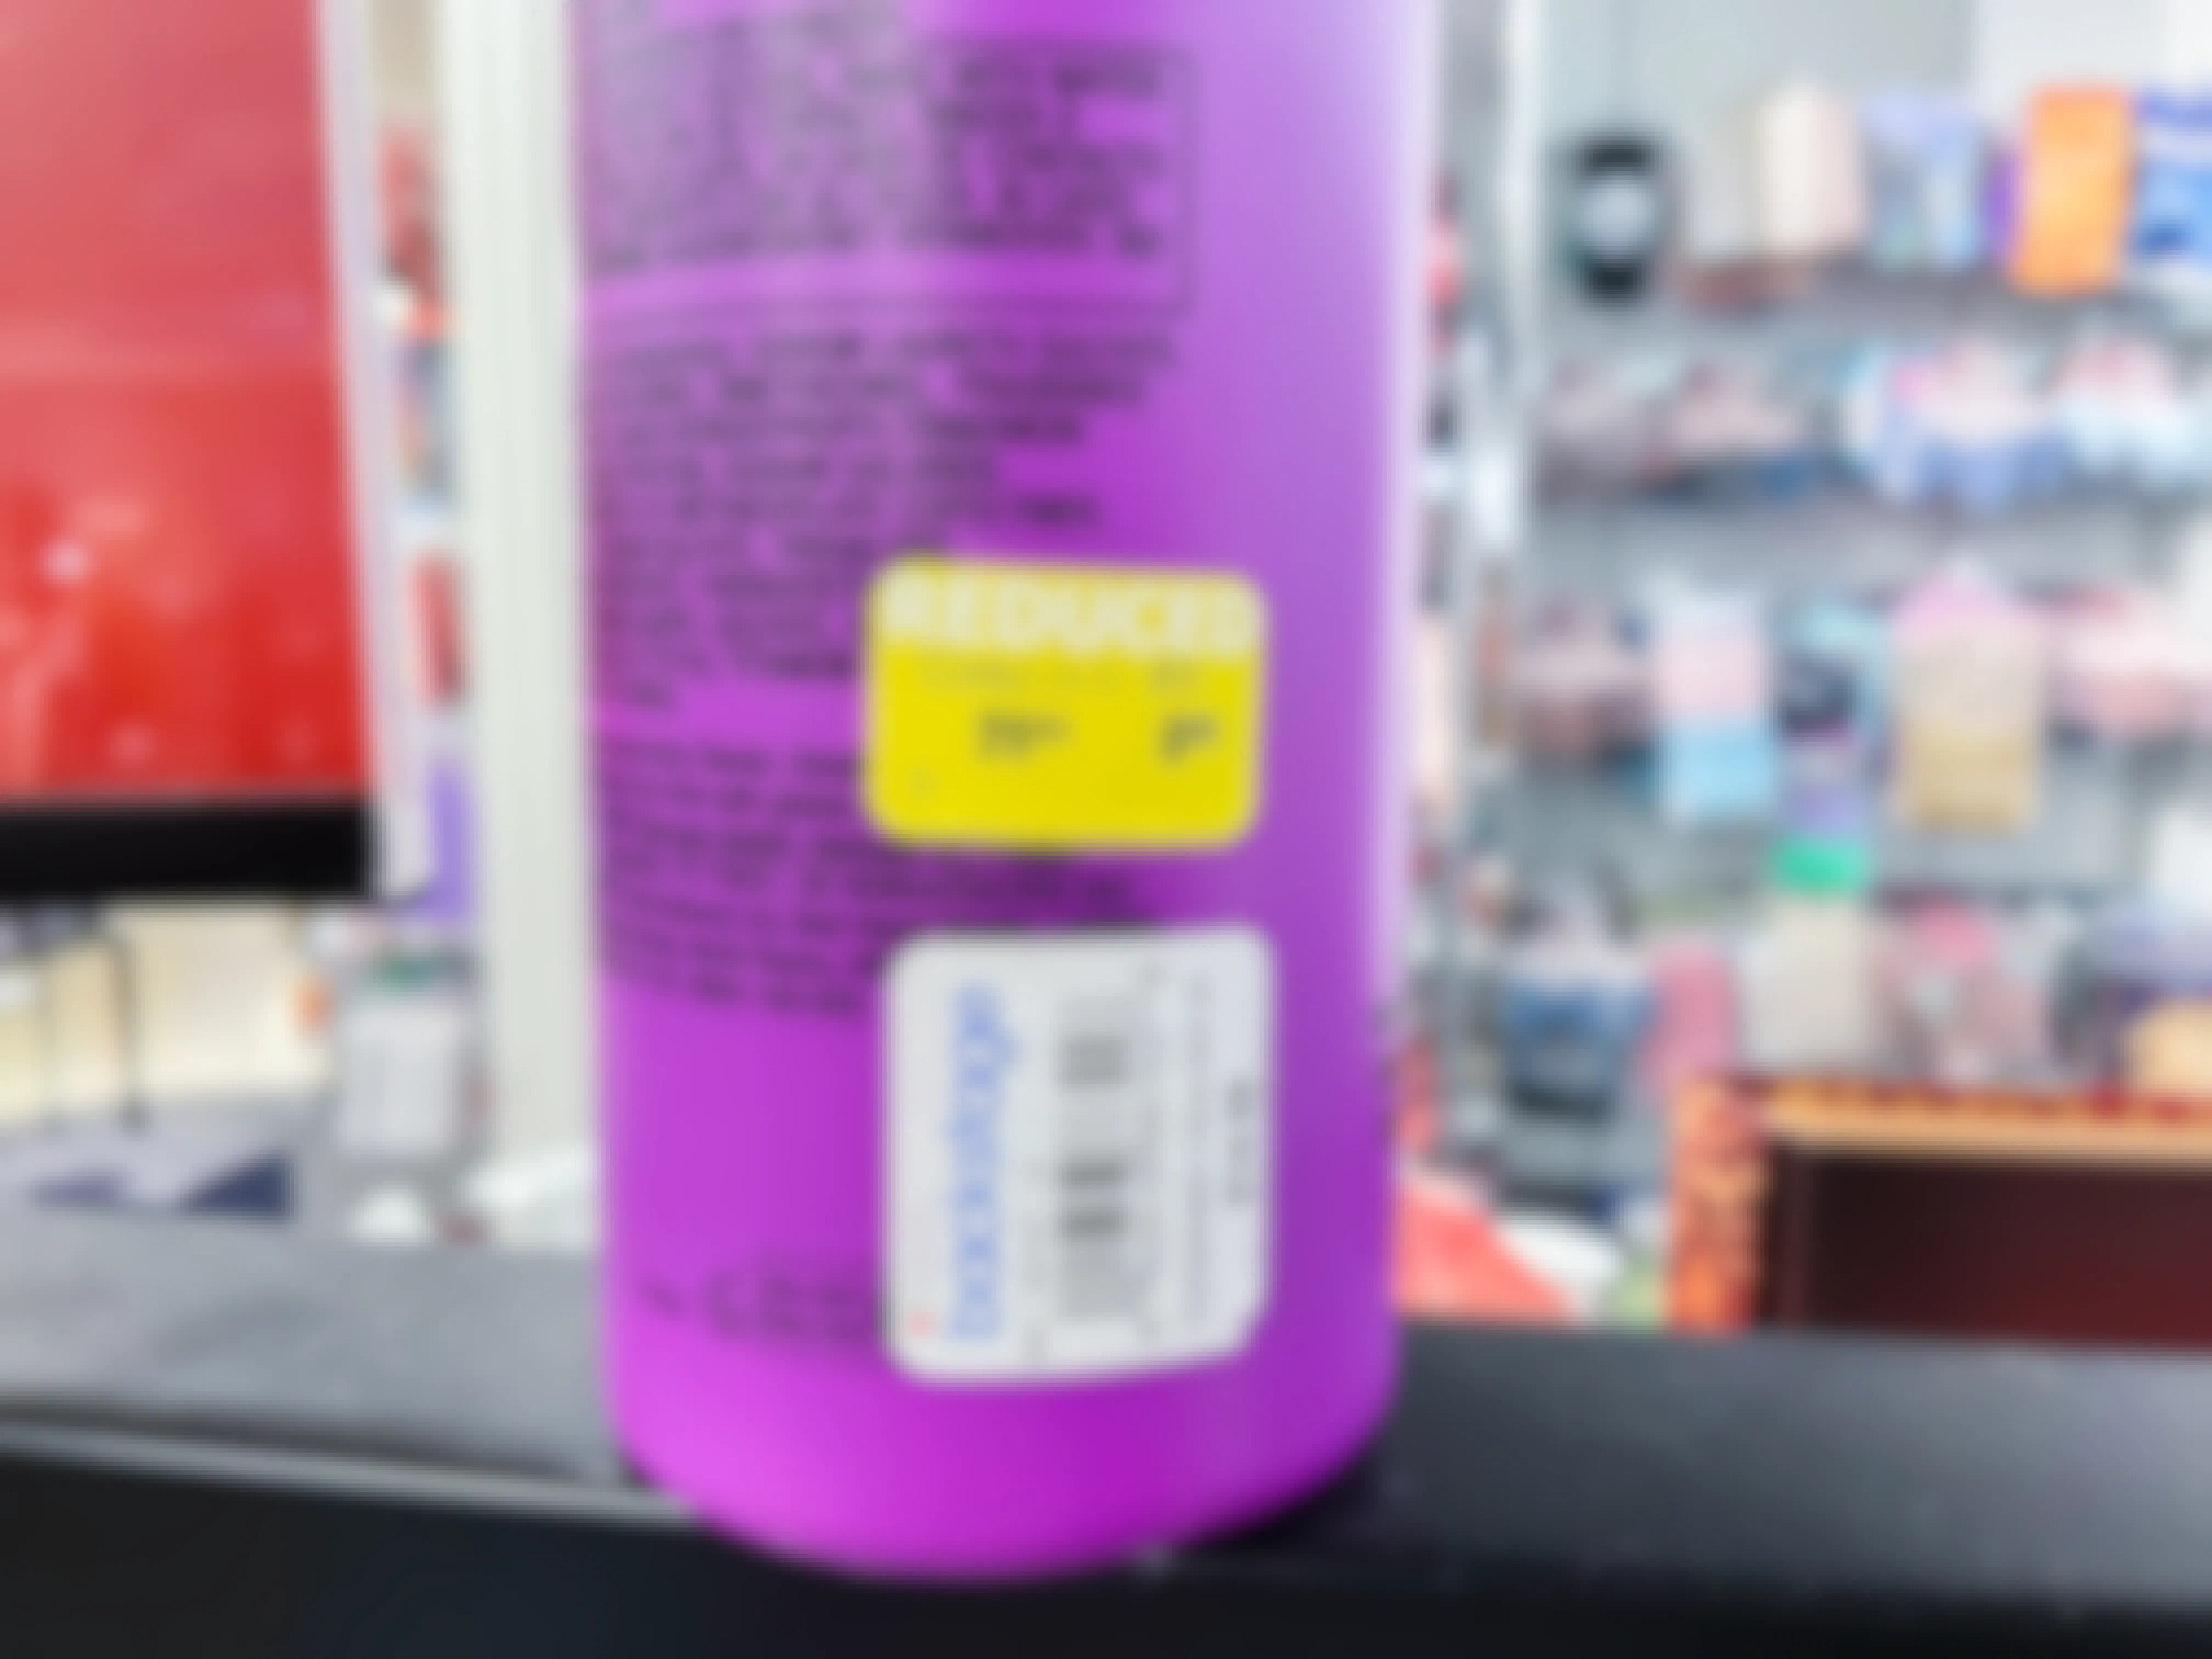 a bottle of Bed Head shampoo at Macy's Backstage with a yellow sticker indicating a reduced price